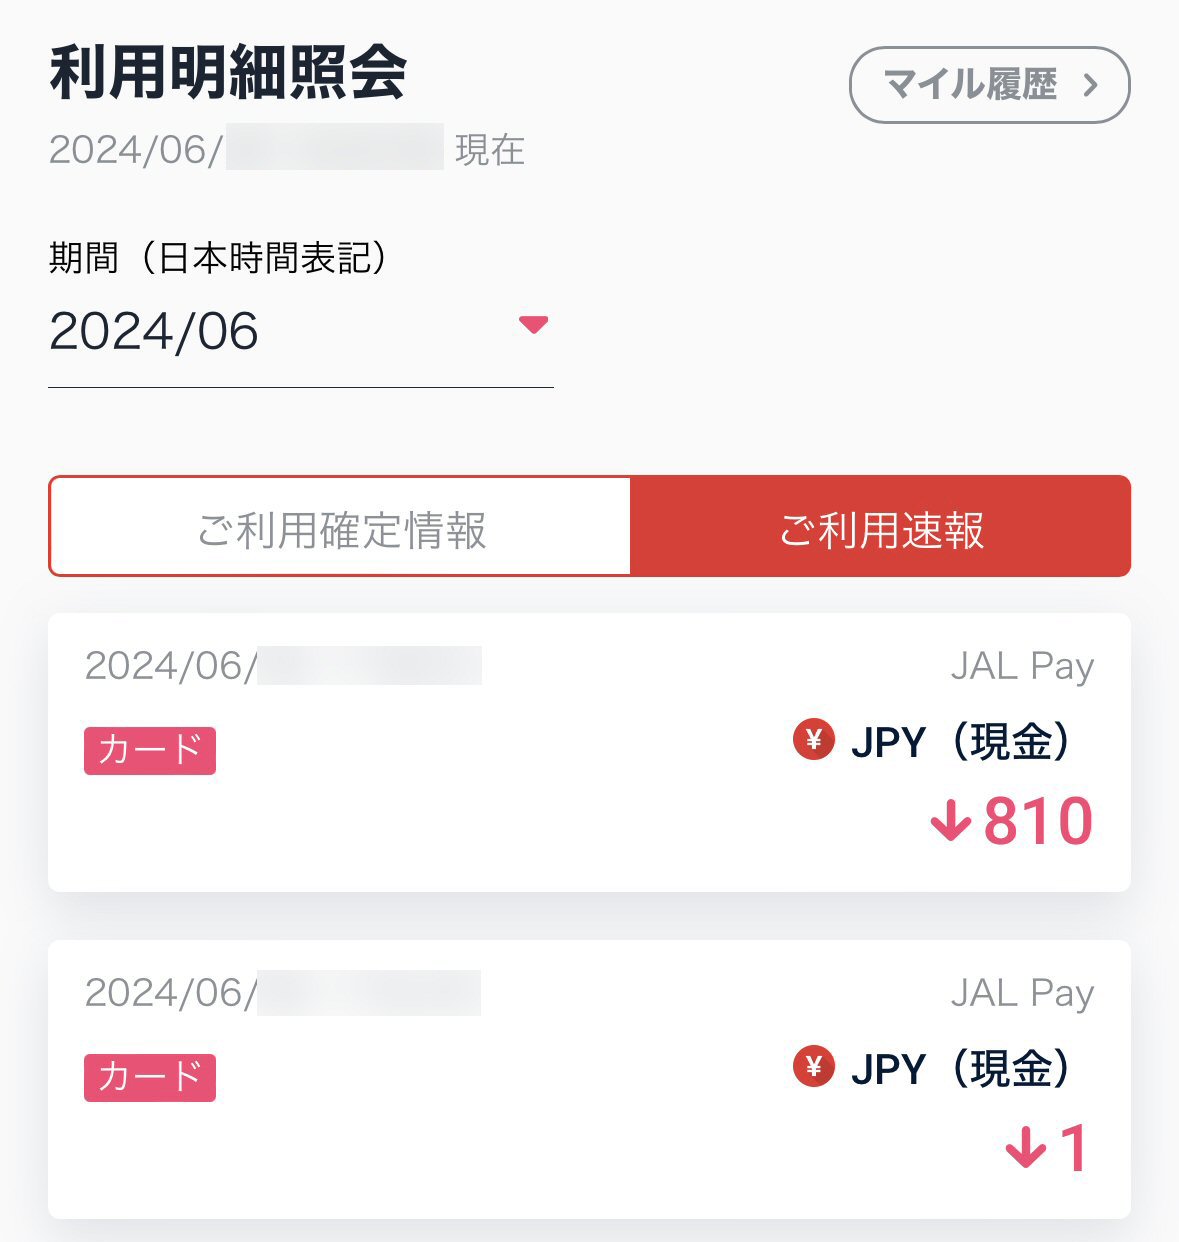 JAL Payの利用履歴